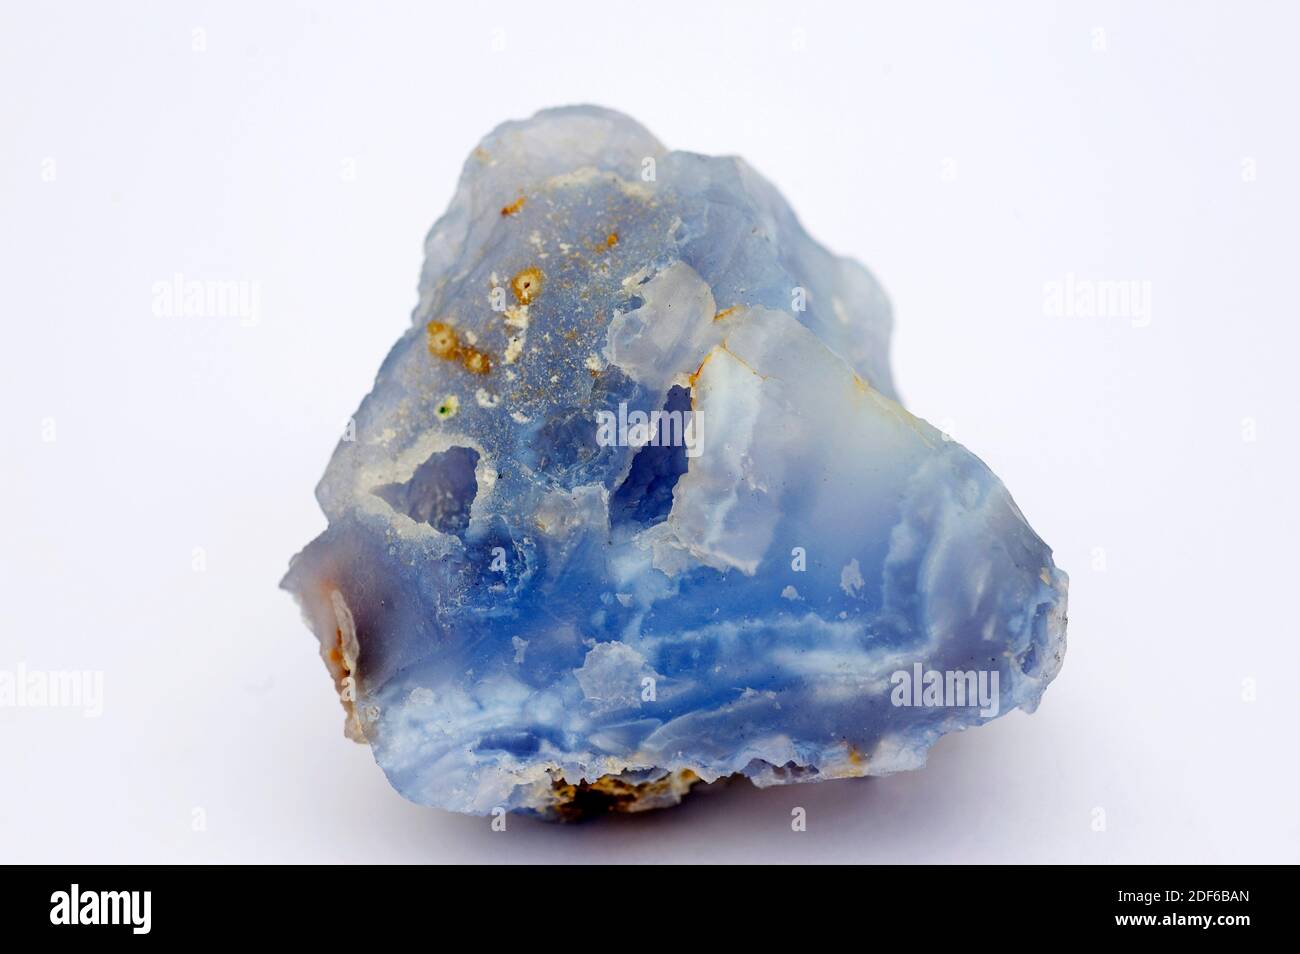 Blue chalcedony is a cryptocrystalline variety of silica composed of two minerals, quartz and moganite (silicon dioxide). This sample comes from Stock Photo